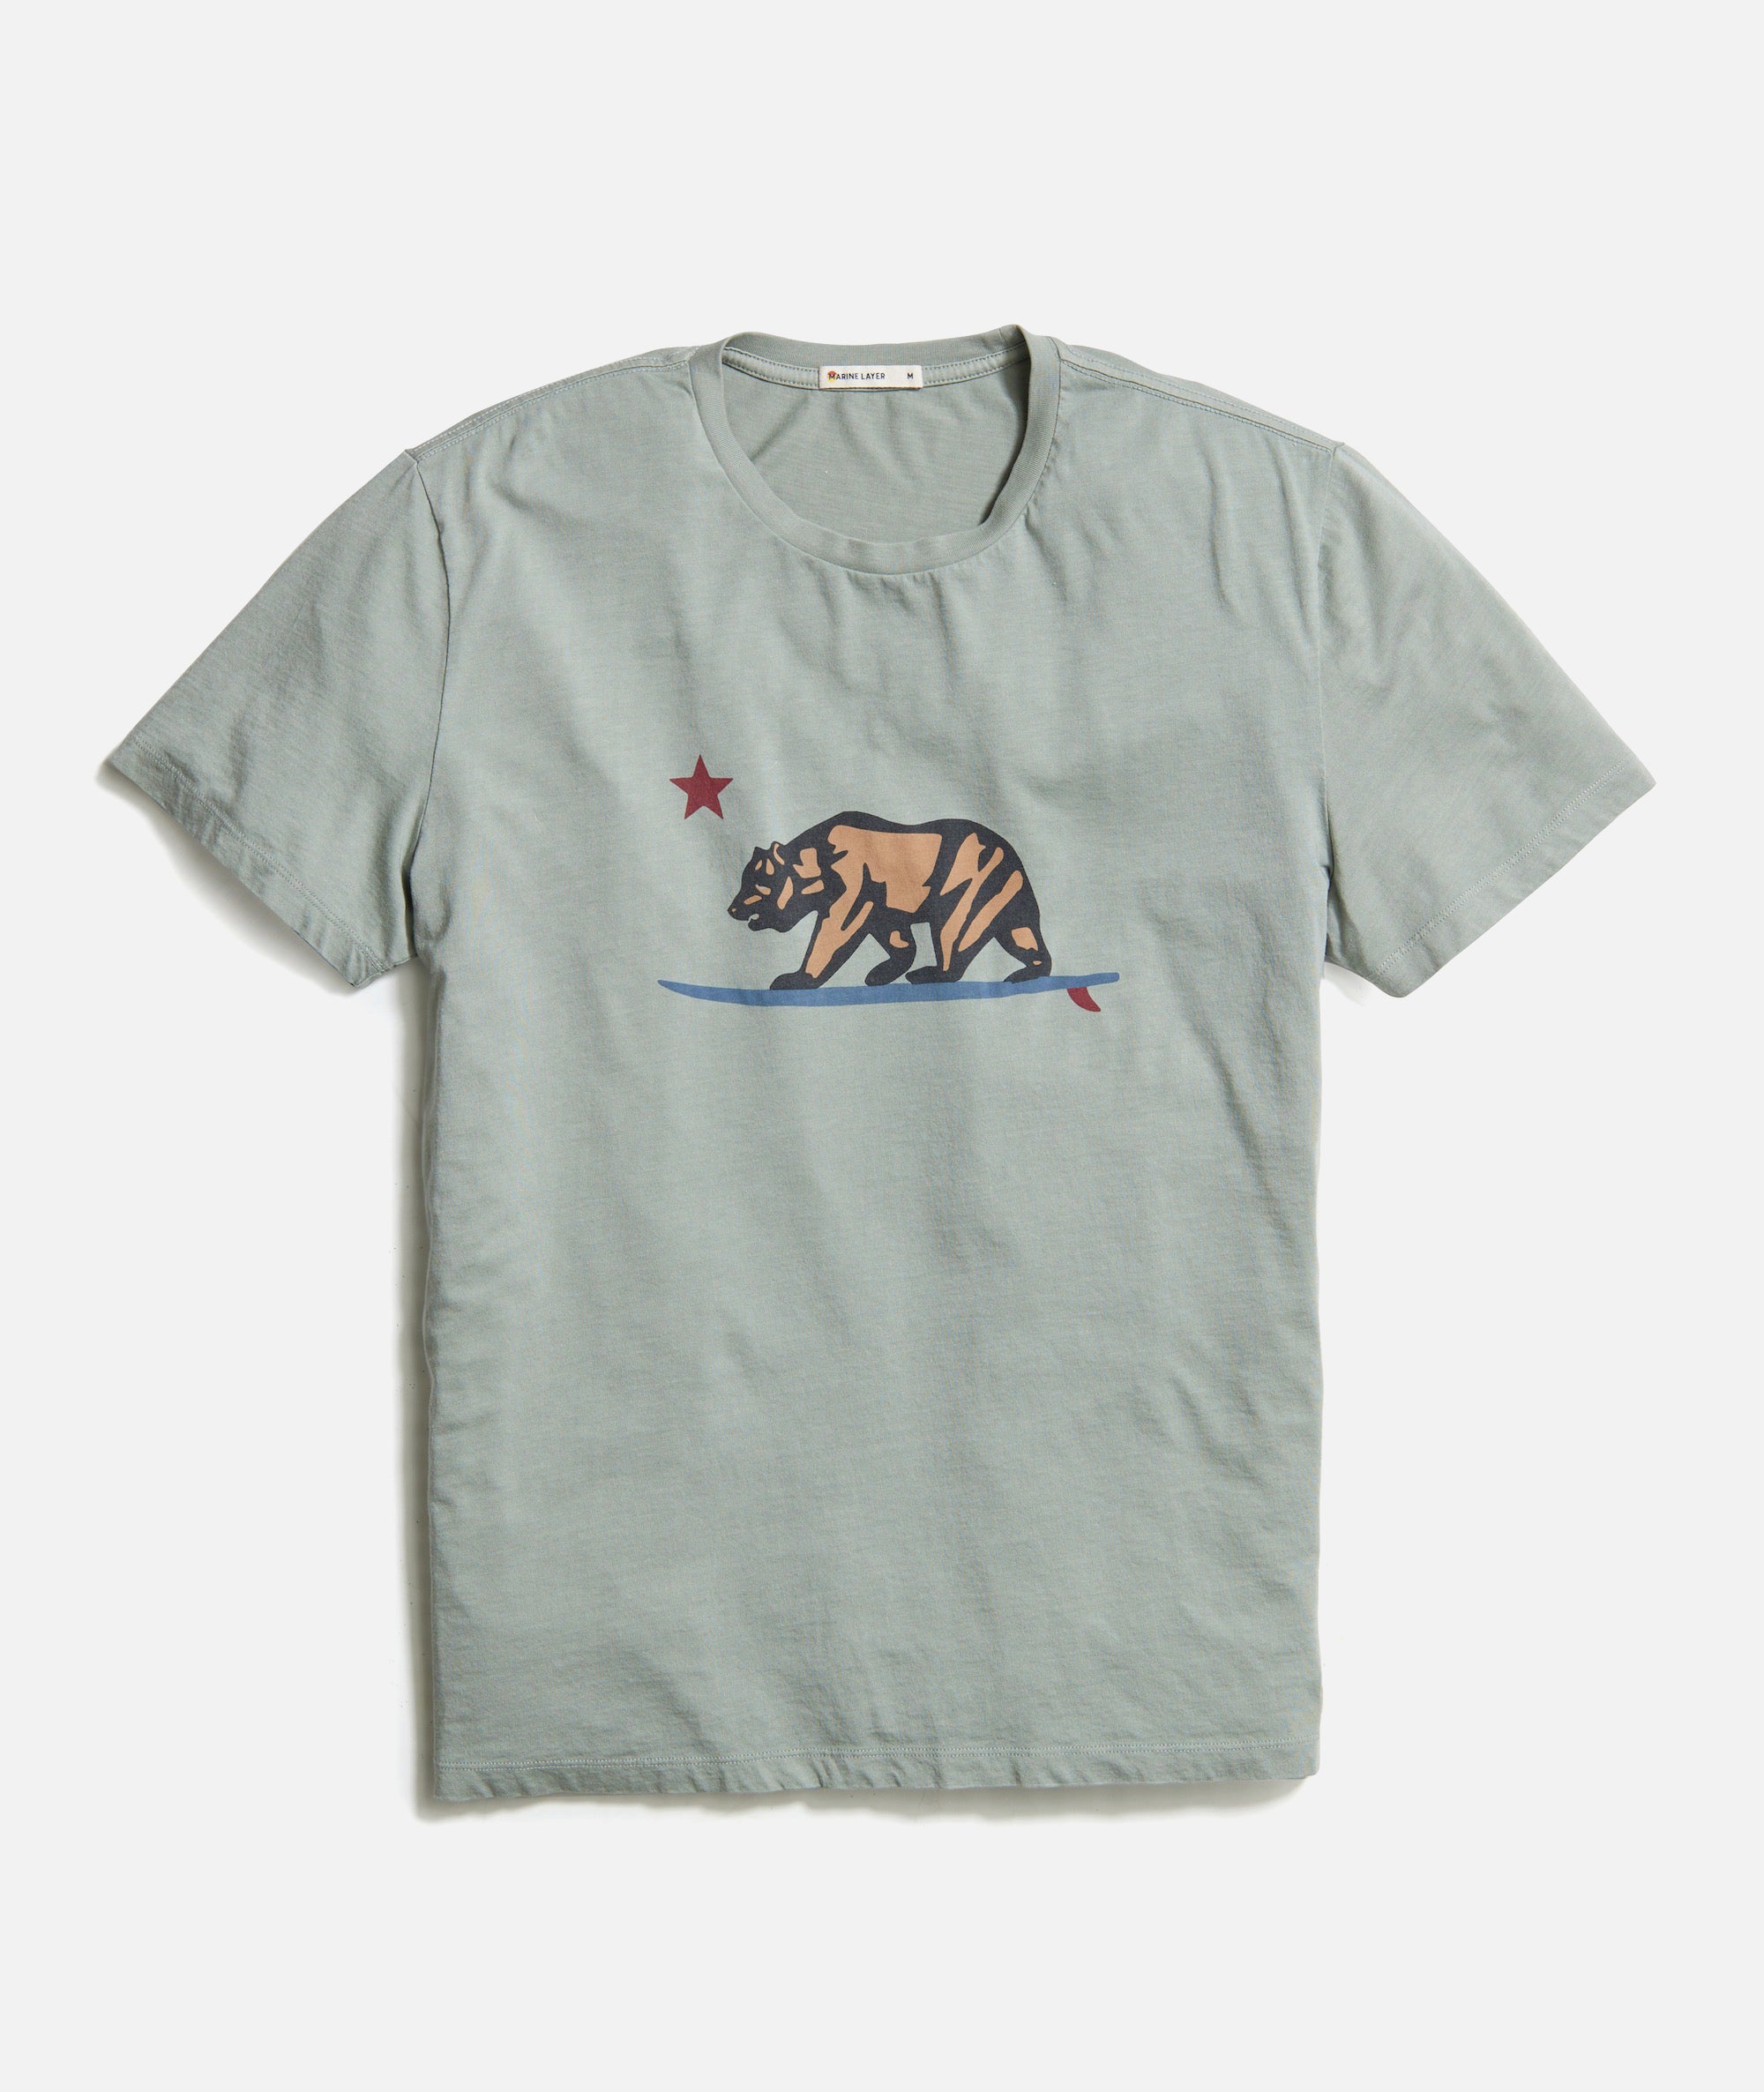 Marine for – Guys Layer Off 20% 3 Tees